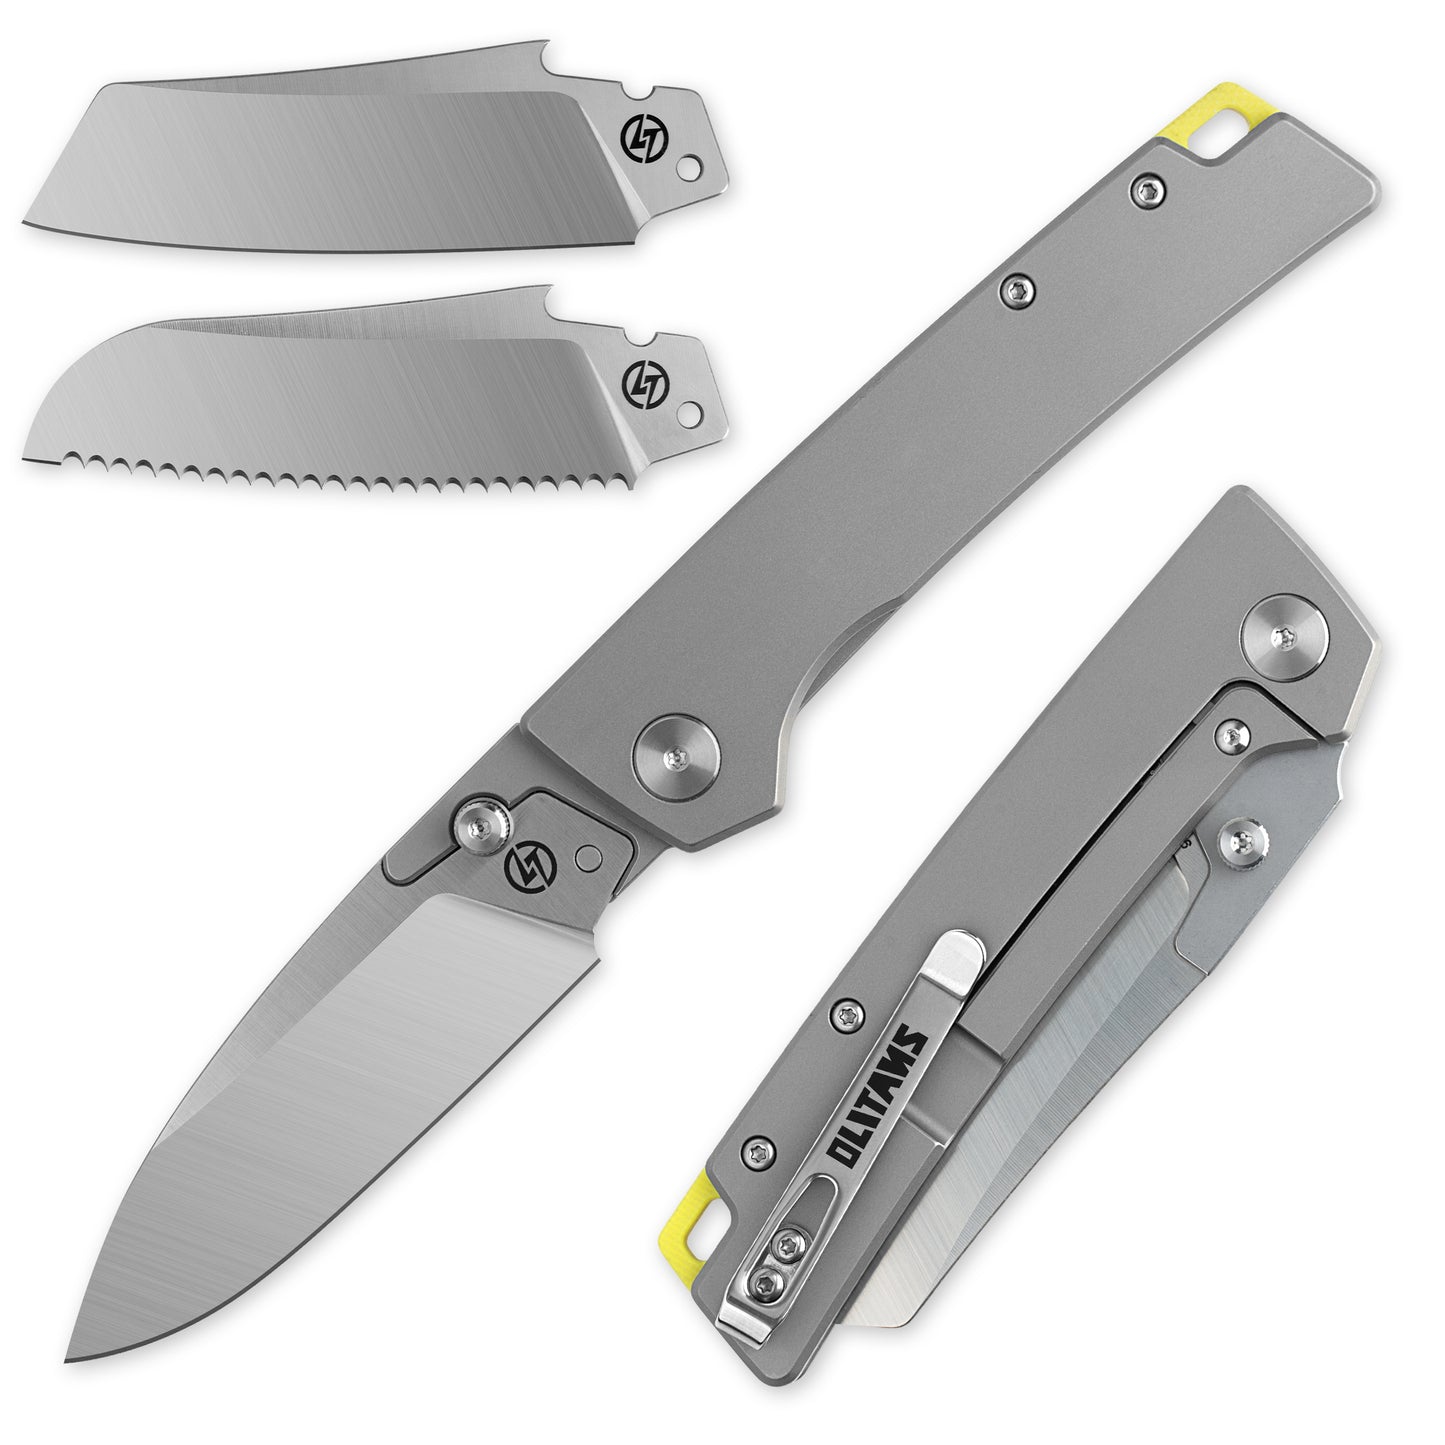 OLITANS T024 Folding Knife for EDC, Replaceable blades Pocket knife, TC4 Titanium Alloy Handle, for Outdoor, Survival, Hunting and Camping, 4.4oz